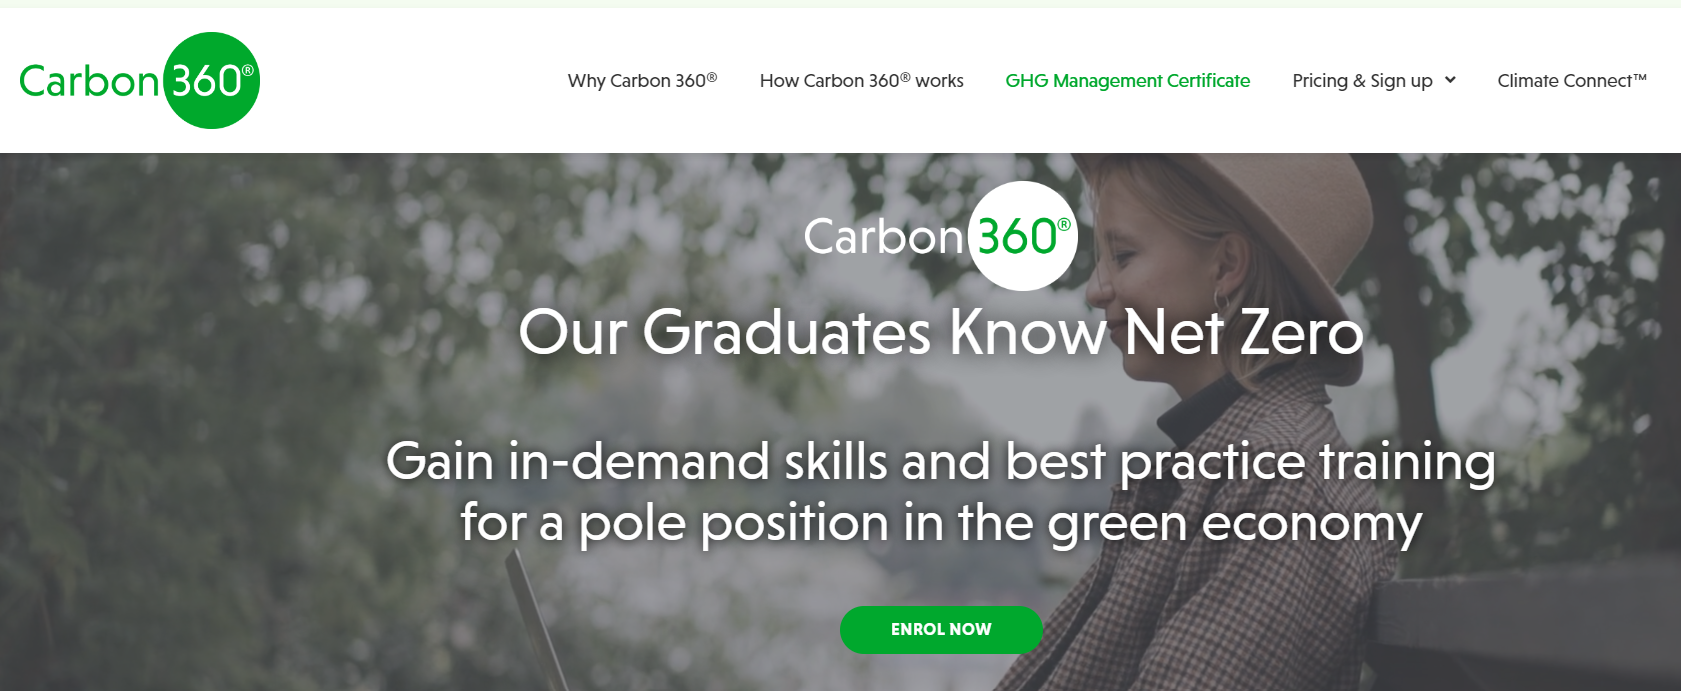 What is the Carbon360 GHG Management Certificate?